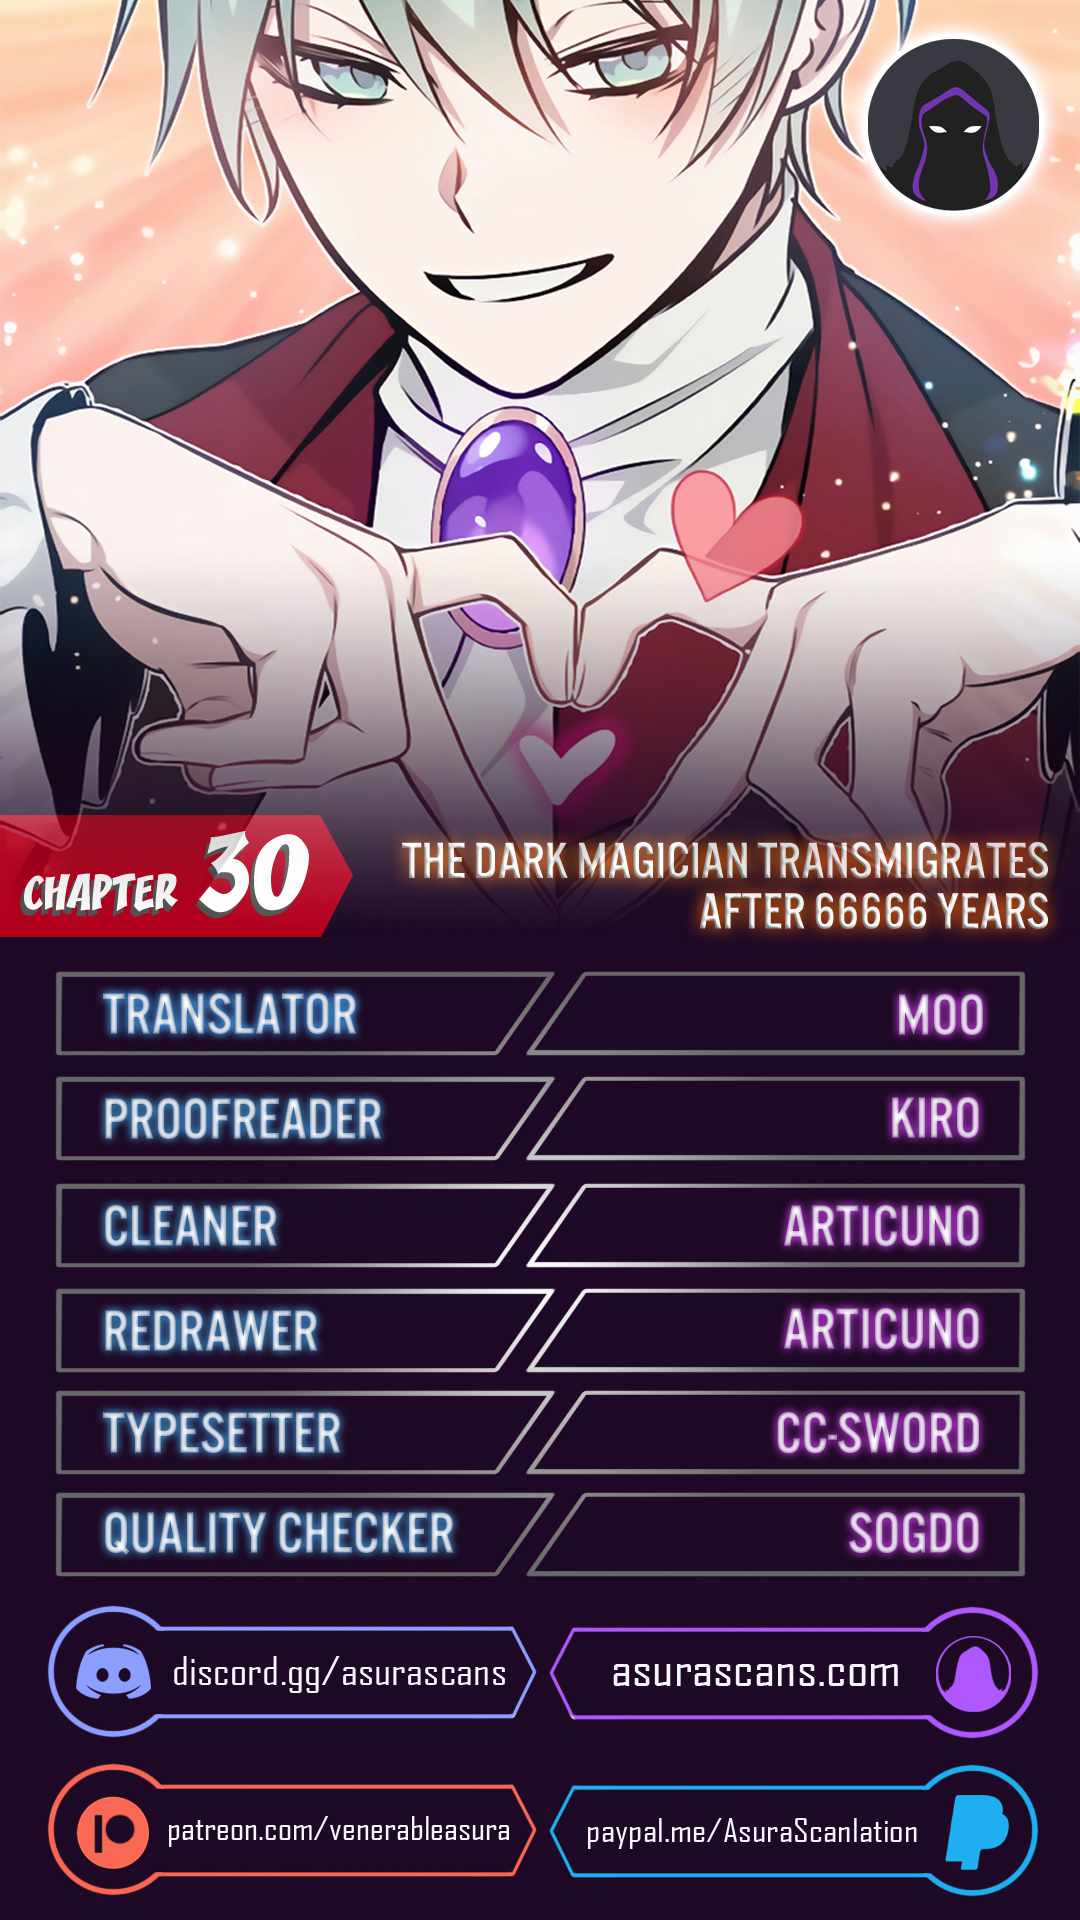 The Dark Magician Transmigrates After 66666 Years chapter 30